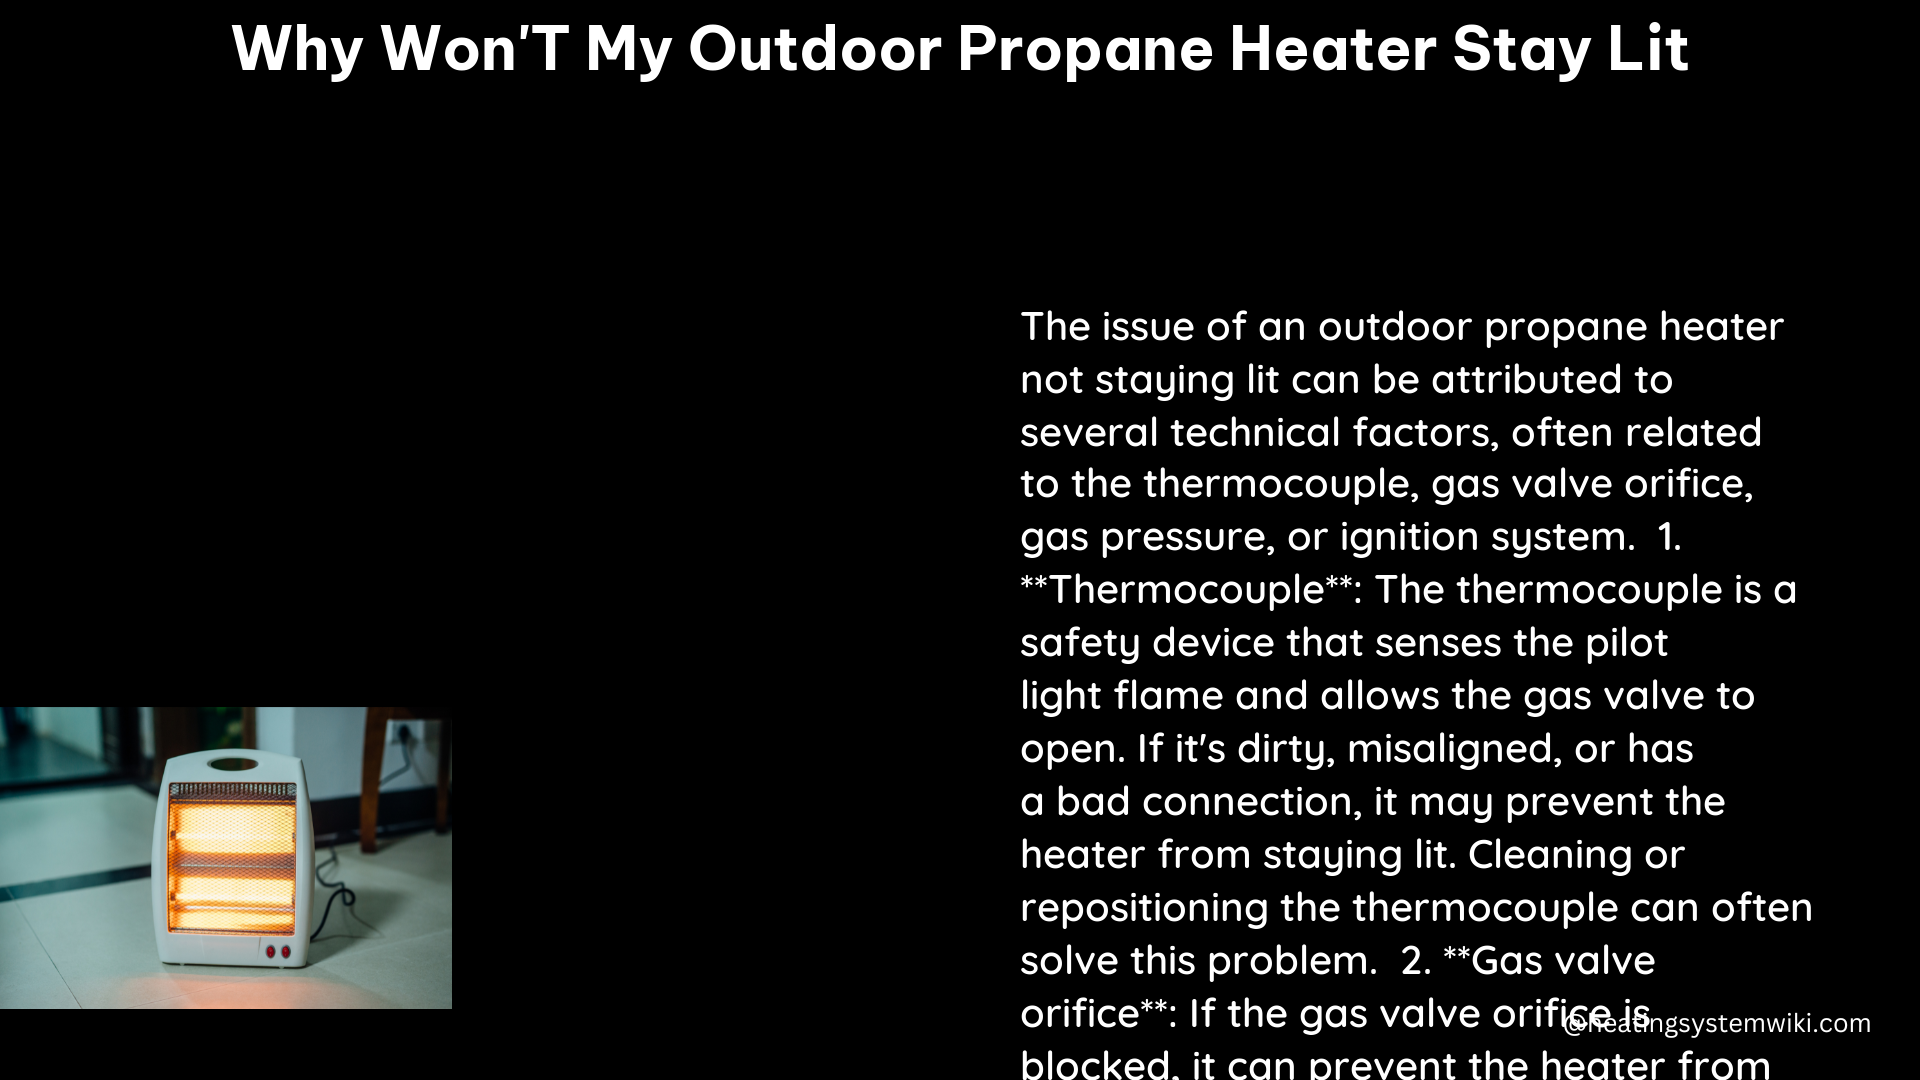 why won't my outdoor propane heater stay lit